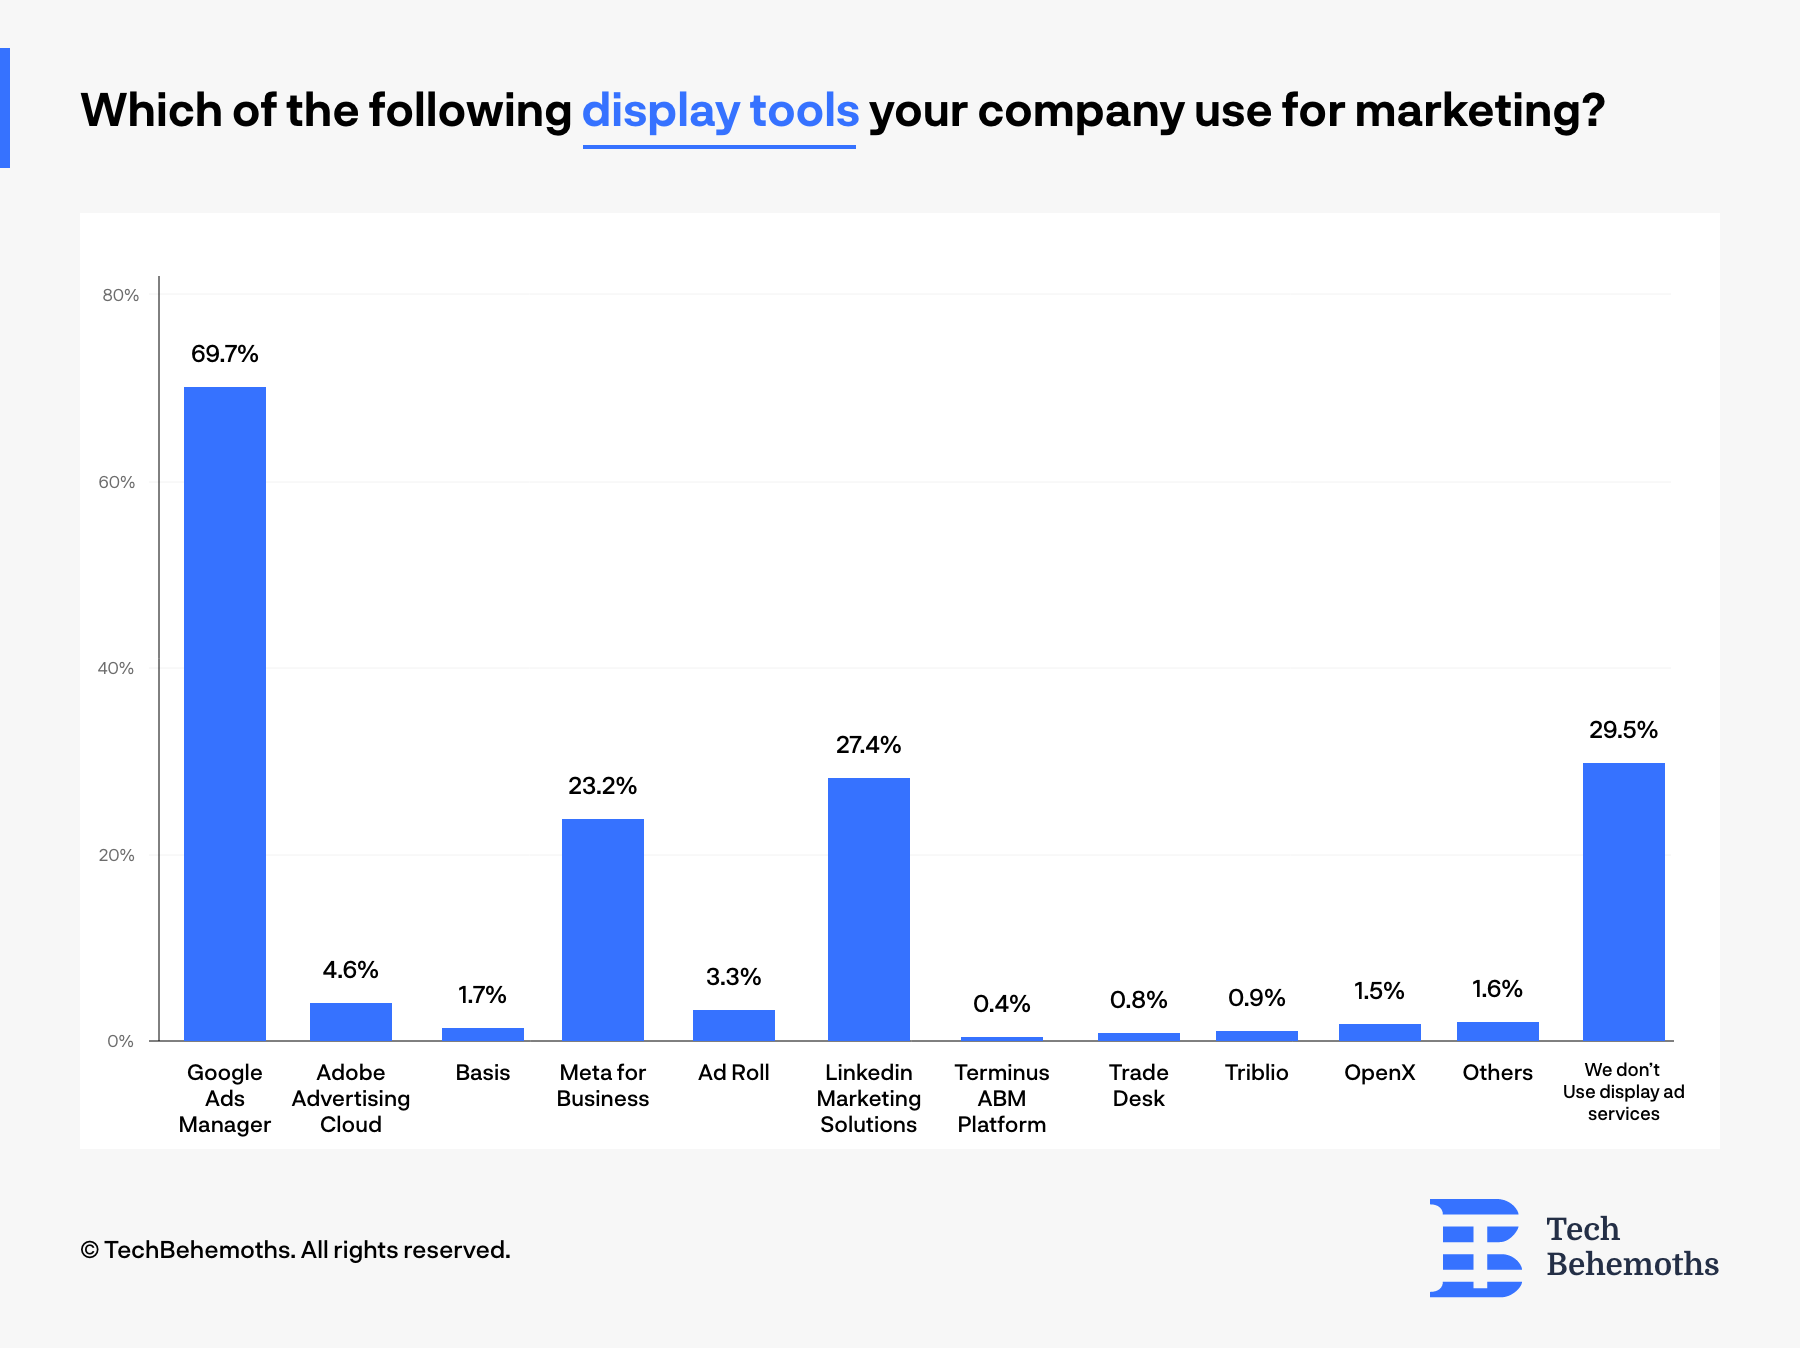 69.7% of IT companies and digital agencies declare that they use Google ads manager as their primary tool for display advertising 